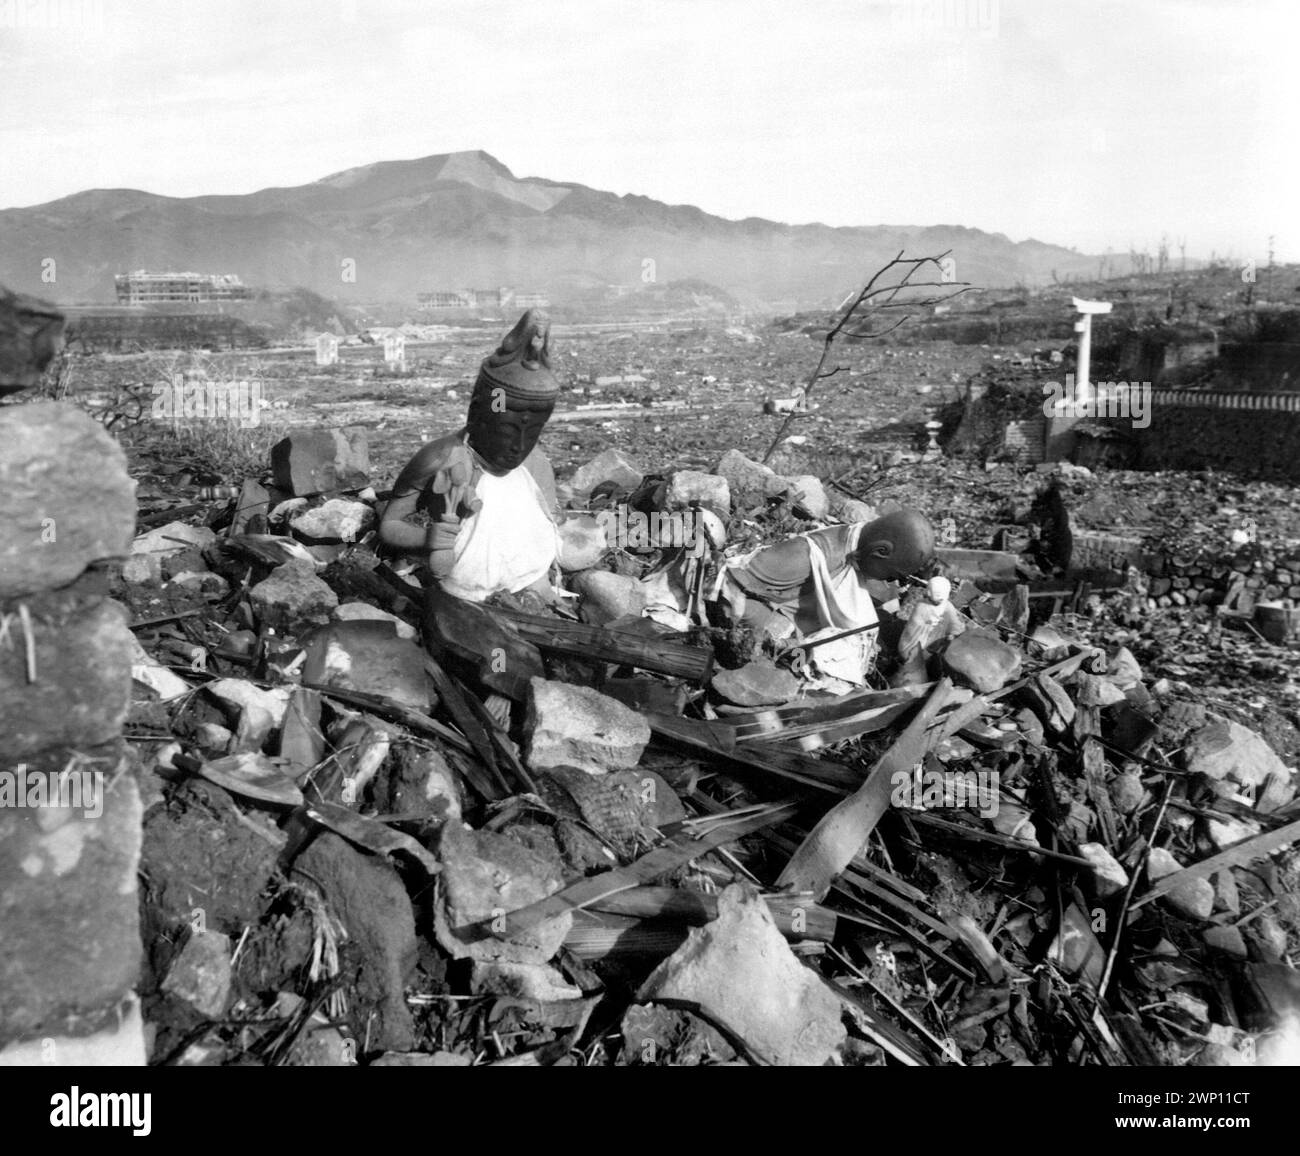 Battered religious figures stand watch on a hill above a tattered valley.  Nagasaki, Japan.  September 24, 1945.  photo by Cpl. Lynn P. Walker, Jr.  (Marine Corps) Stock Photo